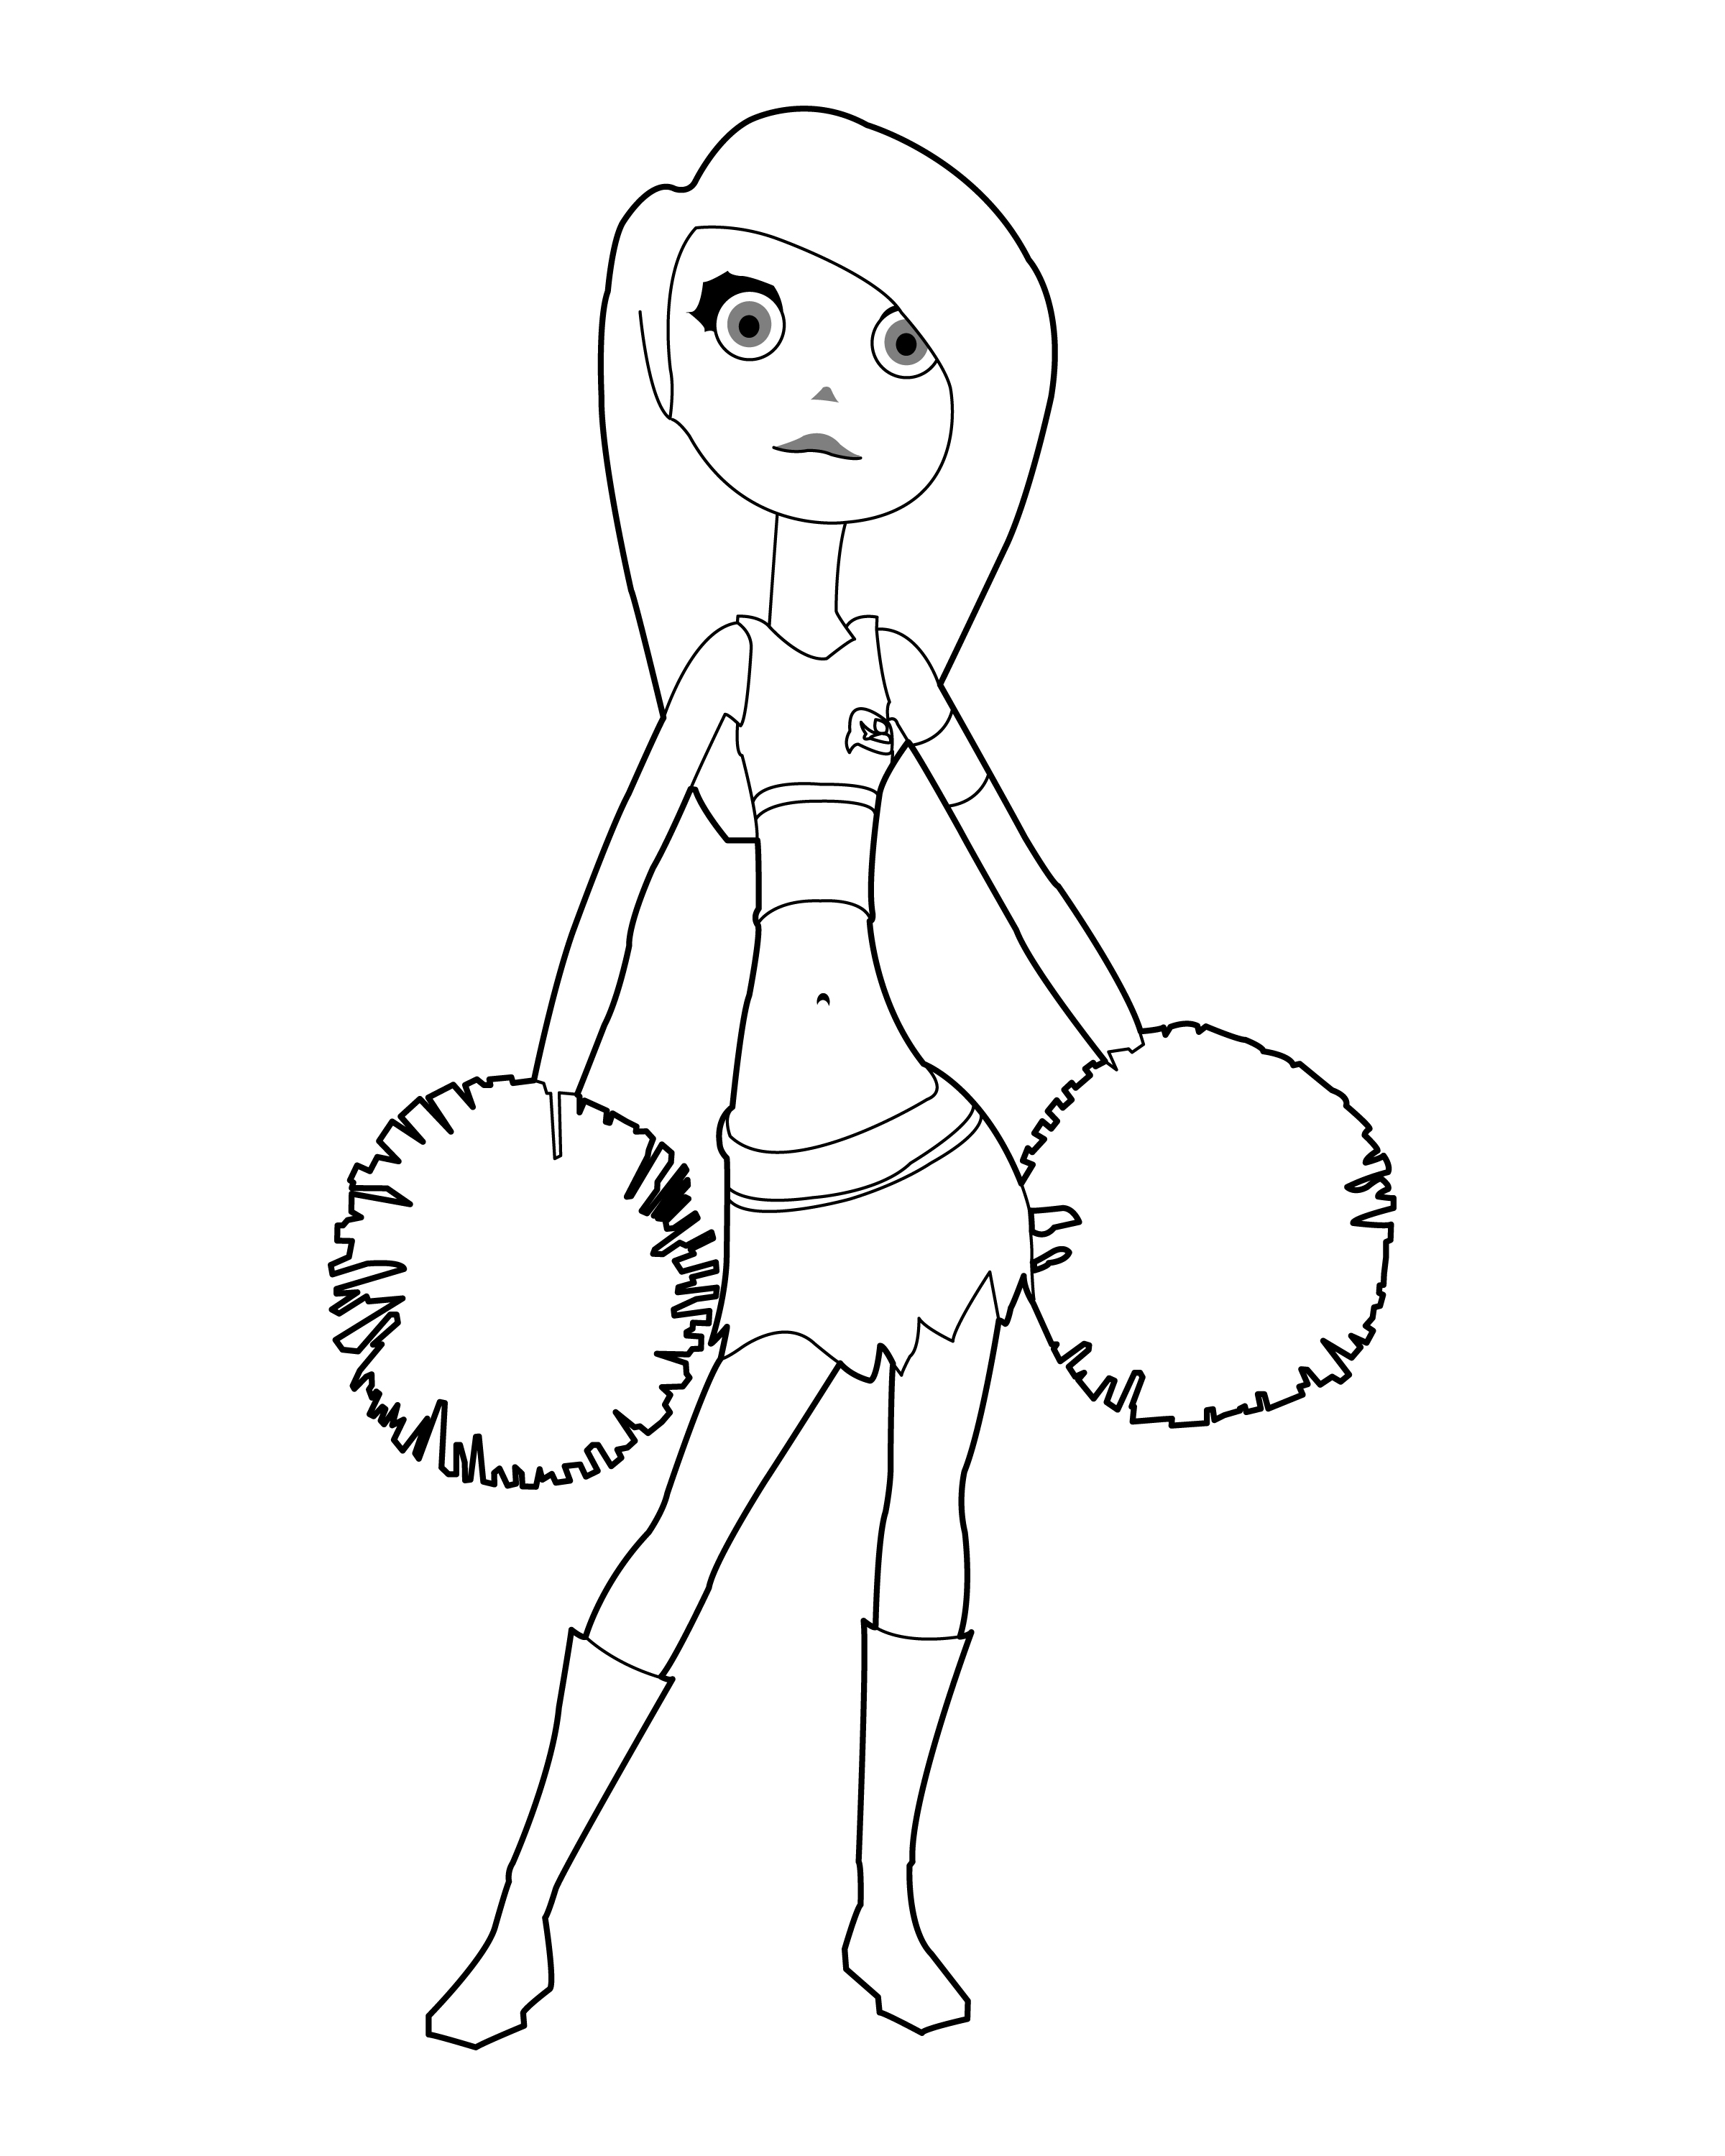 Amazing How To Draw A Cheerleader of the decade Check it out now 